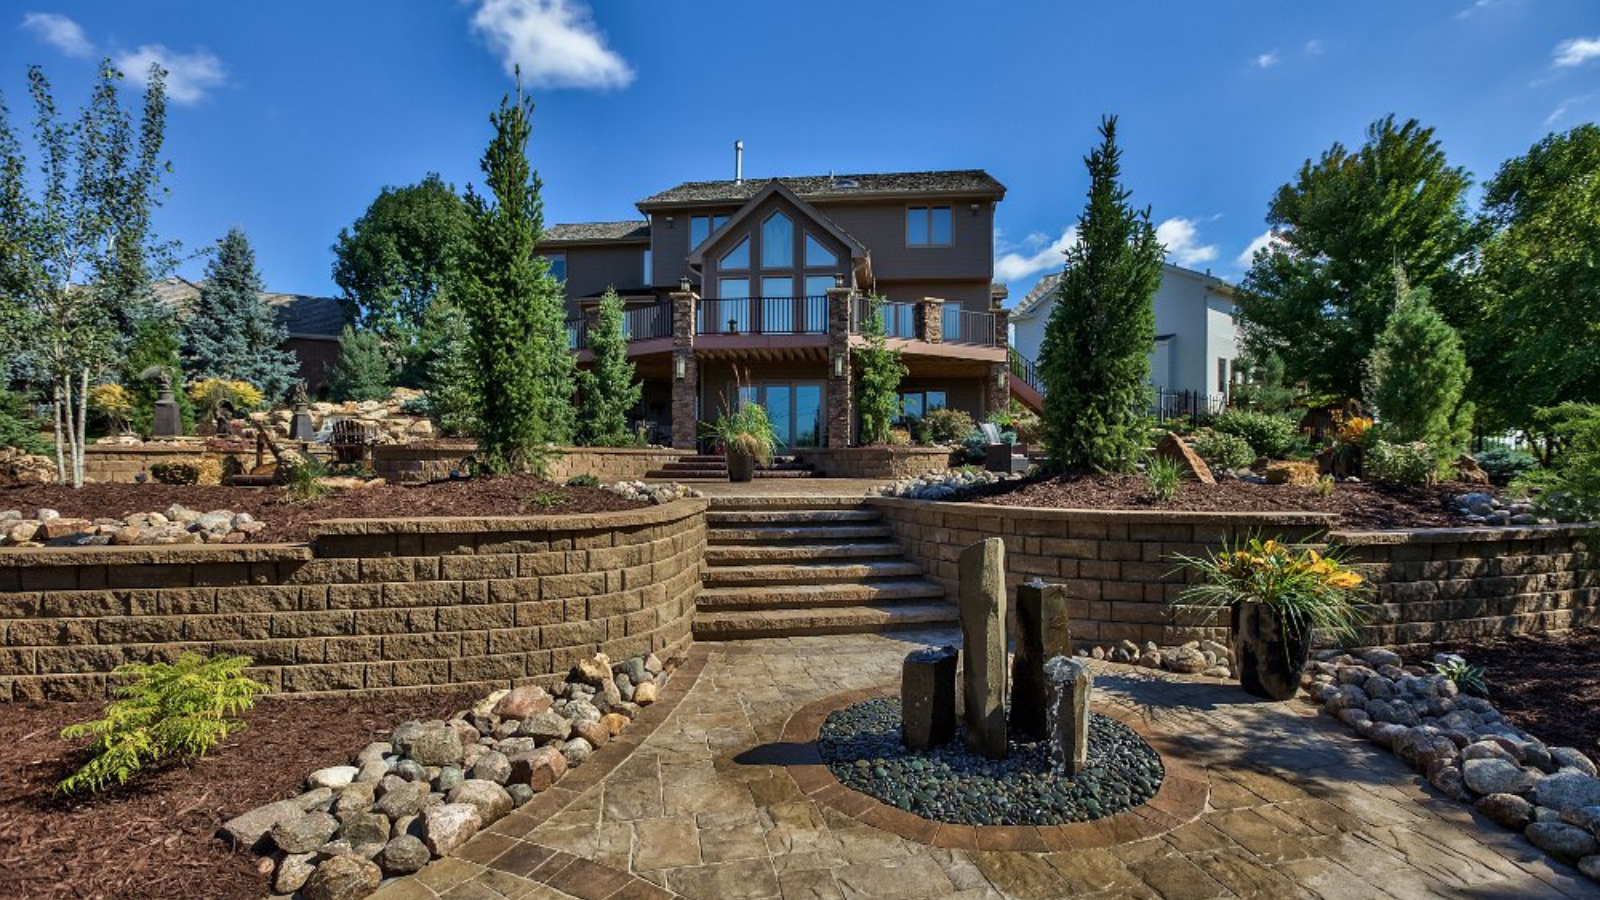 The Advantages of Pondless Water Features